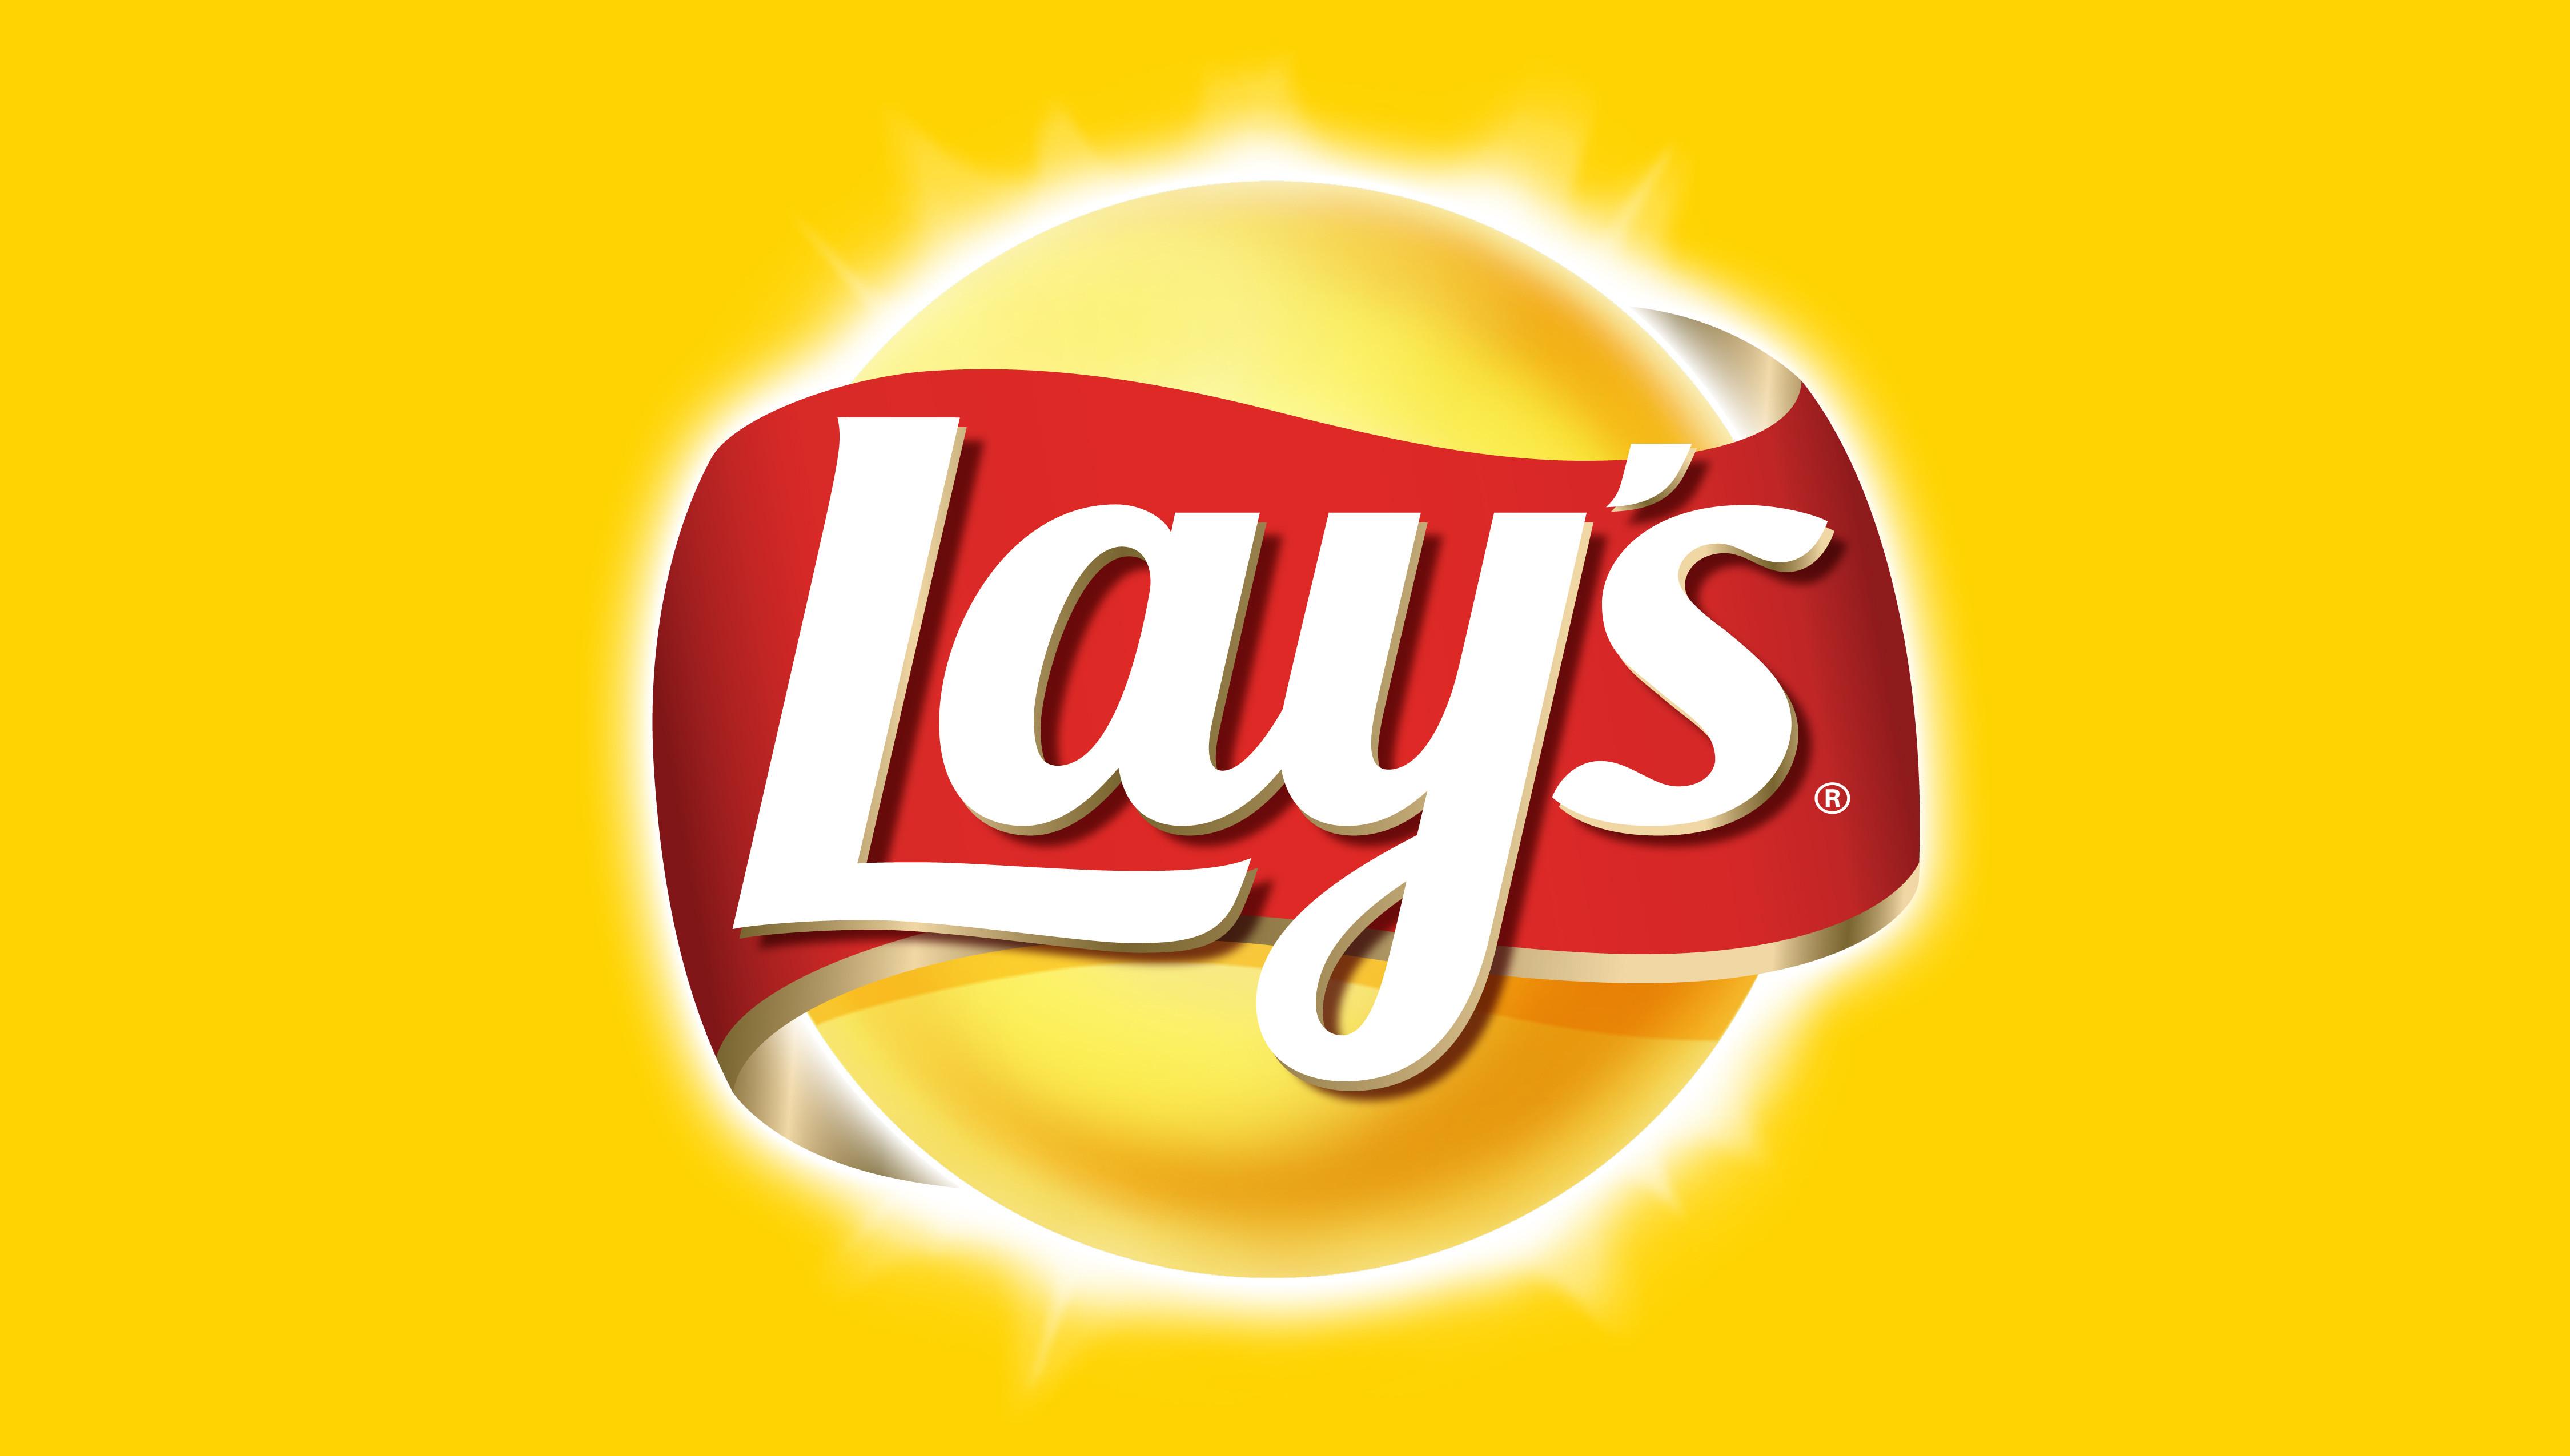 Yellow and Red Chips Logo - Lays. Lays Product Packaging